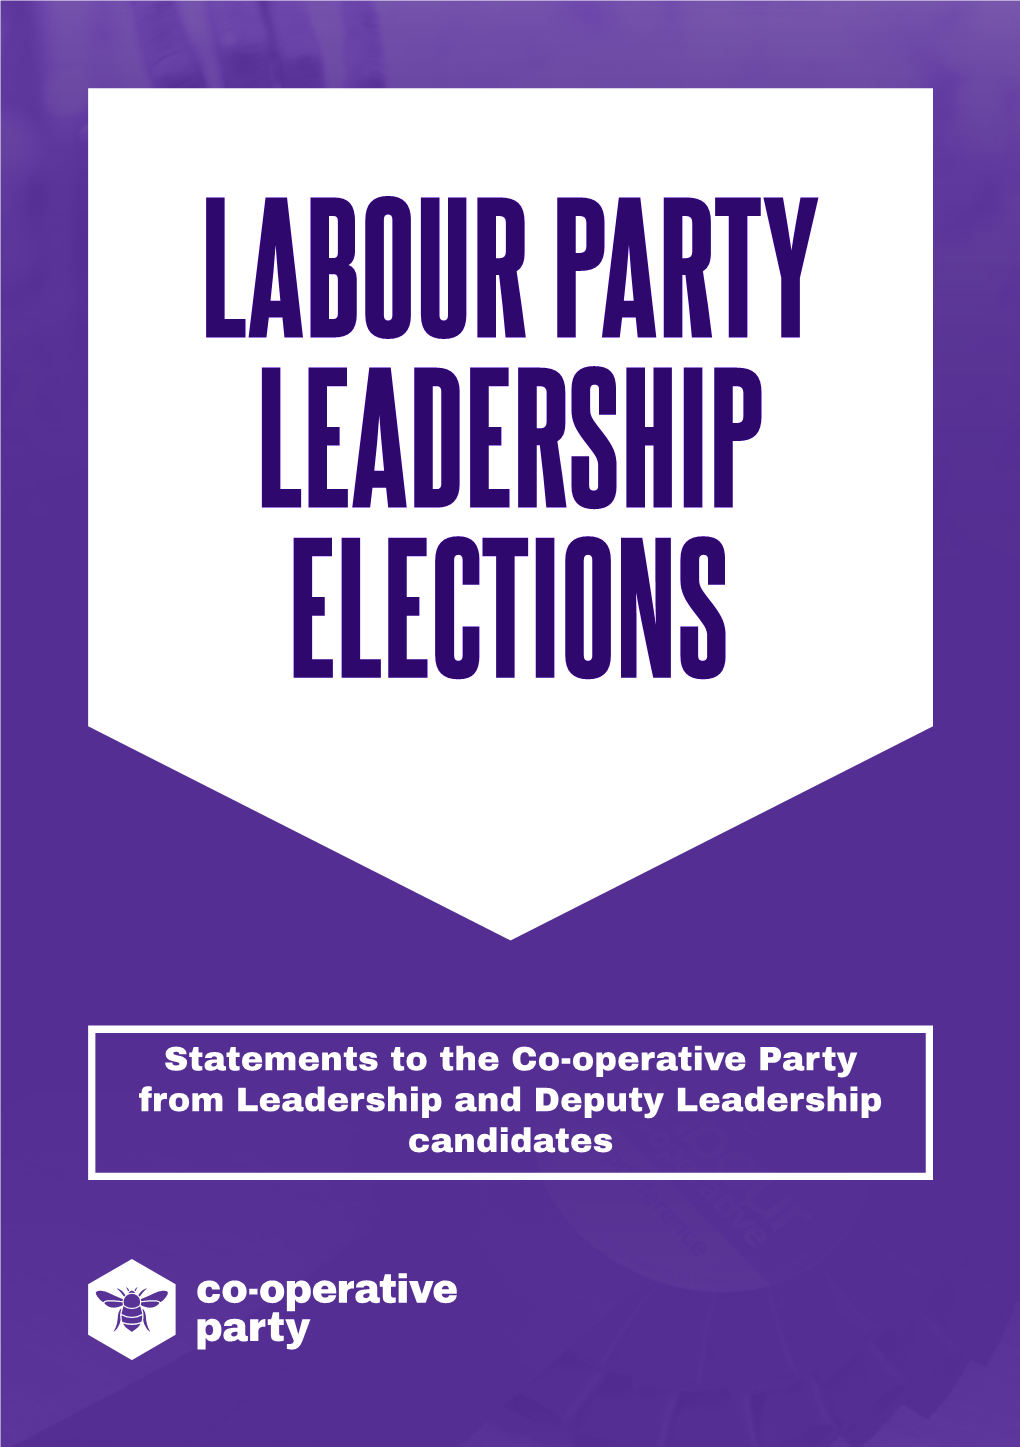 Statements to the Co-Operative Party from Leadership and Deputy Leadership Candidates ABOUT the CO-OPERATIVE PARTY